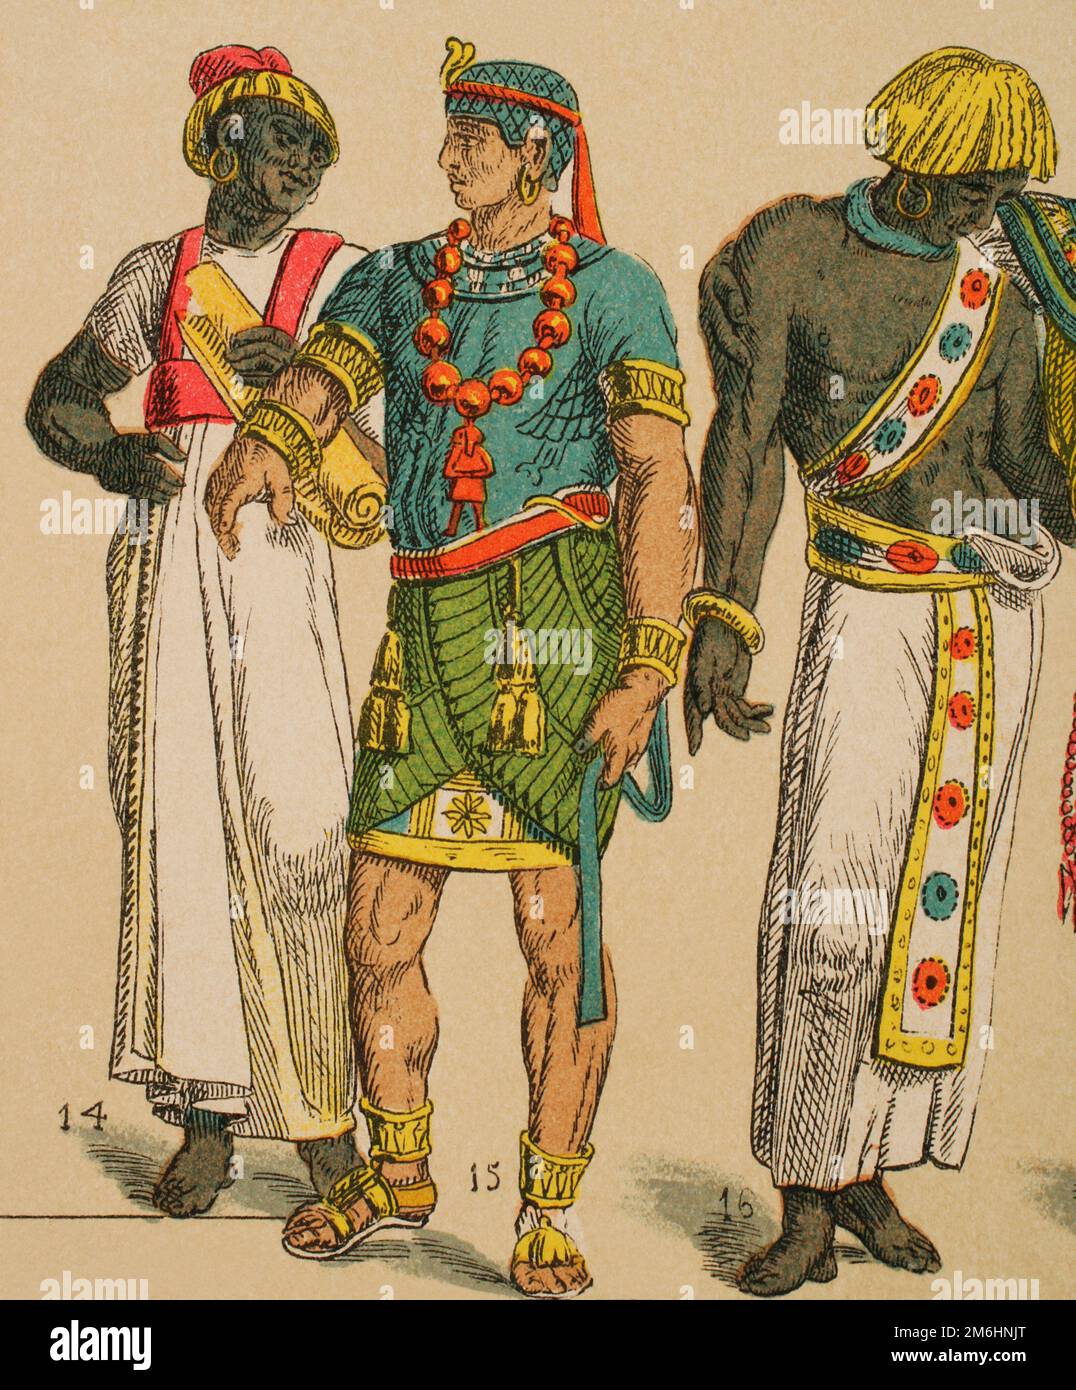 Ancient Egypt. From left to right; 14: scribe, 15: nobleman's jacket, 16: belt-like sash narrow and long with with embroidery in various colours. Chromolithography. 'Historia Universal' (Universal History), by Cesar Cantu. Volume I, 1881. Stock Photo